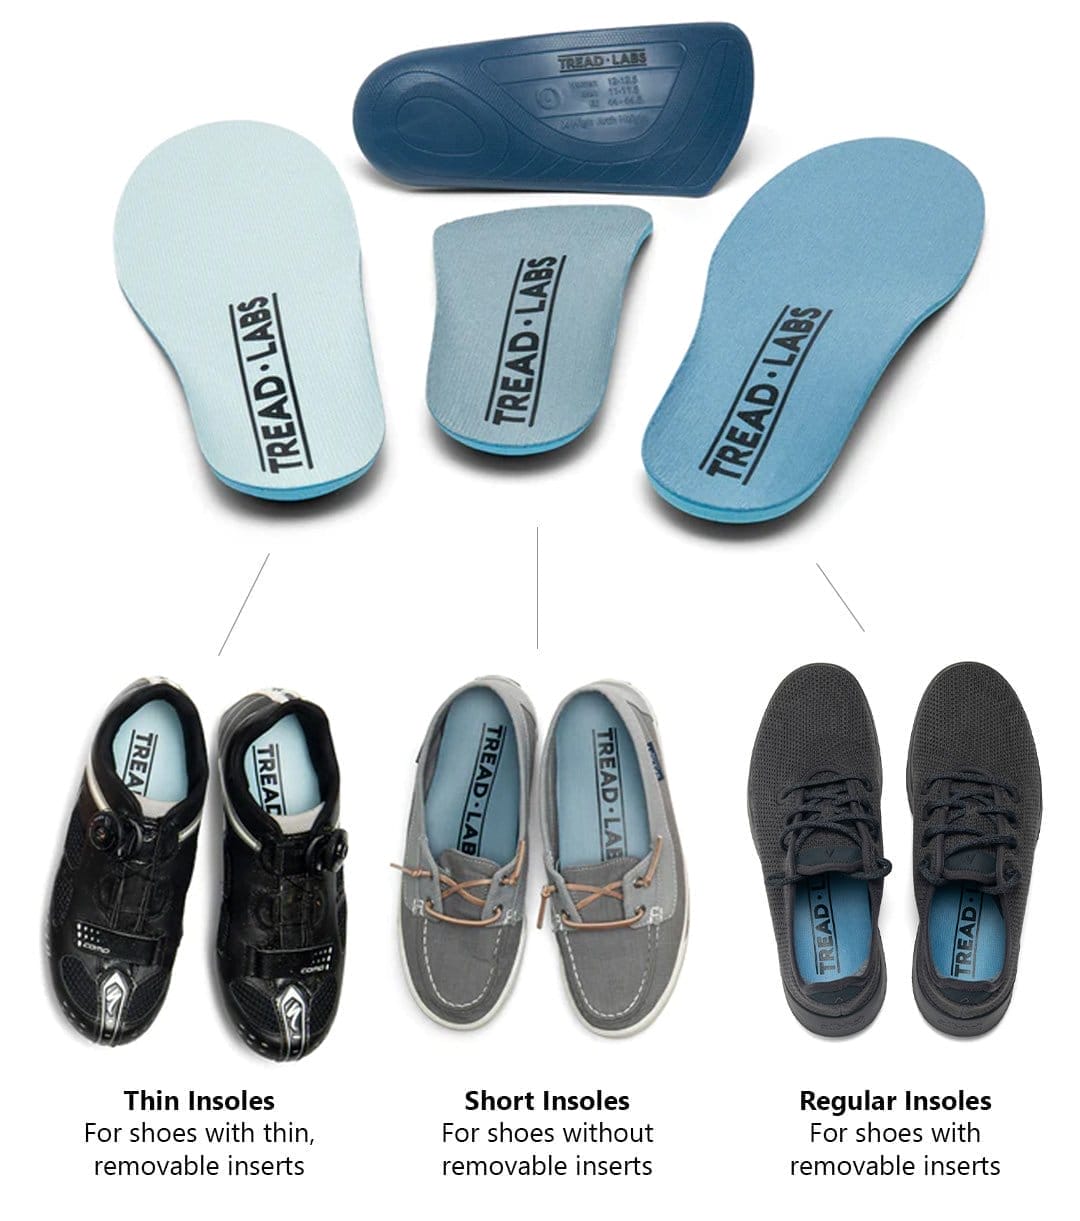 Save on pain relieving support for all your shoes with the Pace Insole Kit.